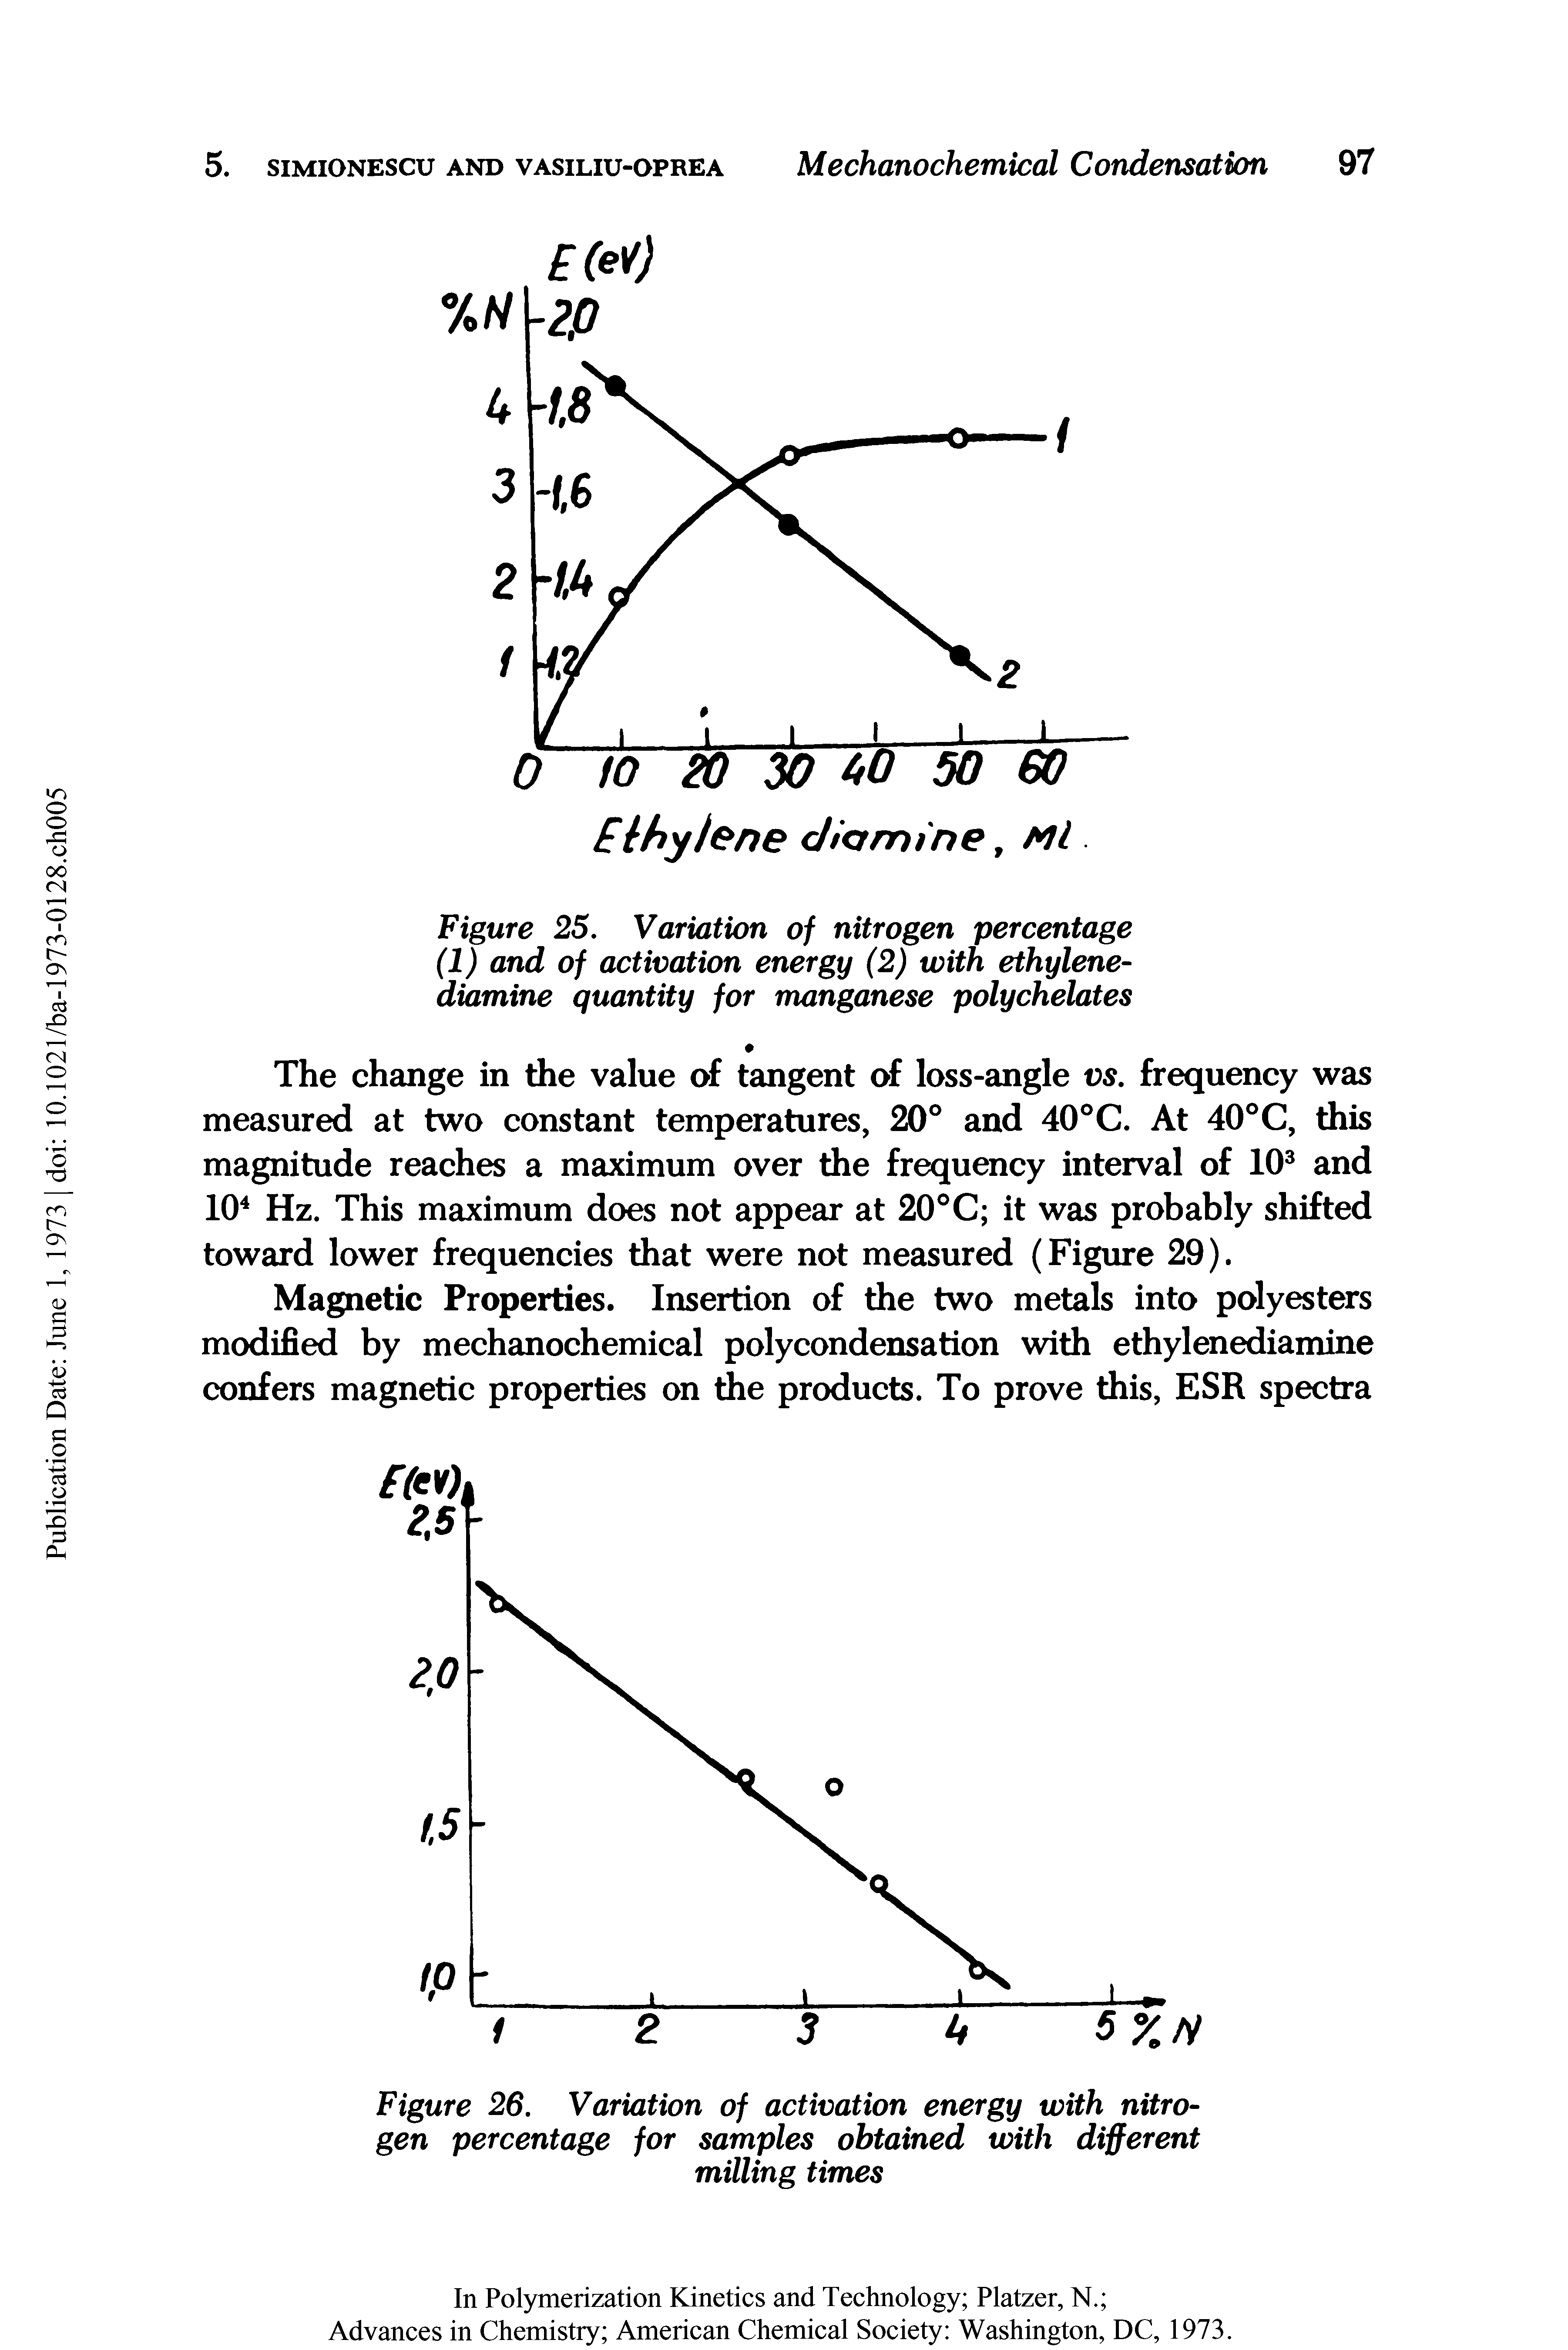 Figure 26. Variation of activation energy with nitrogen percentage for samples obtained with different milling times...